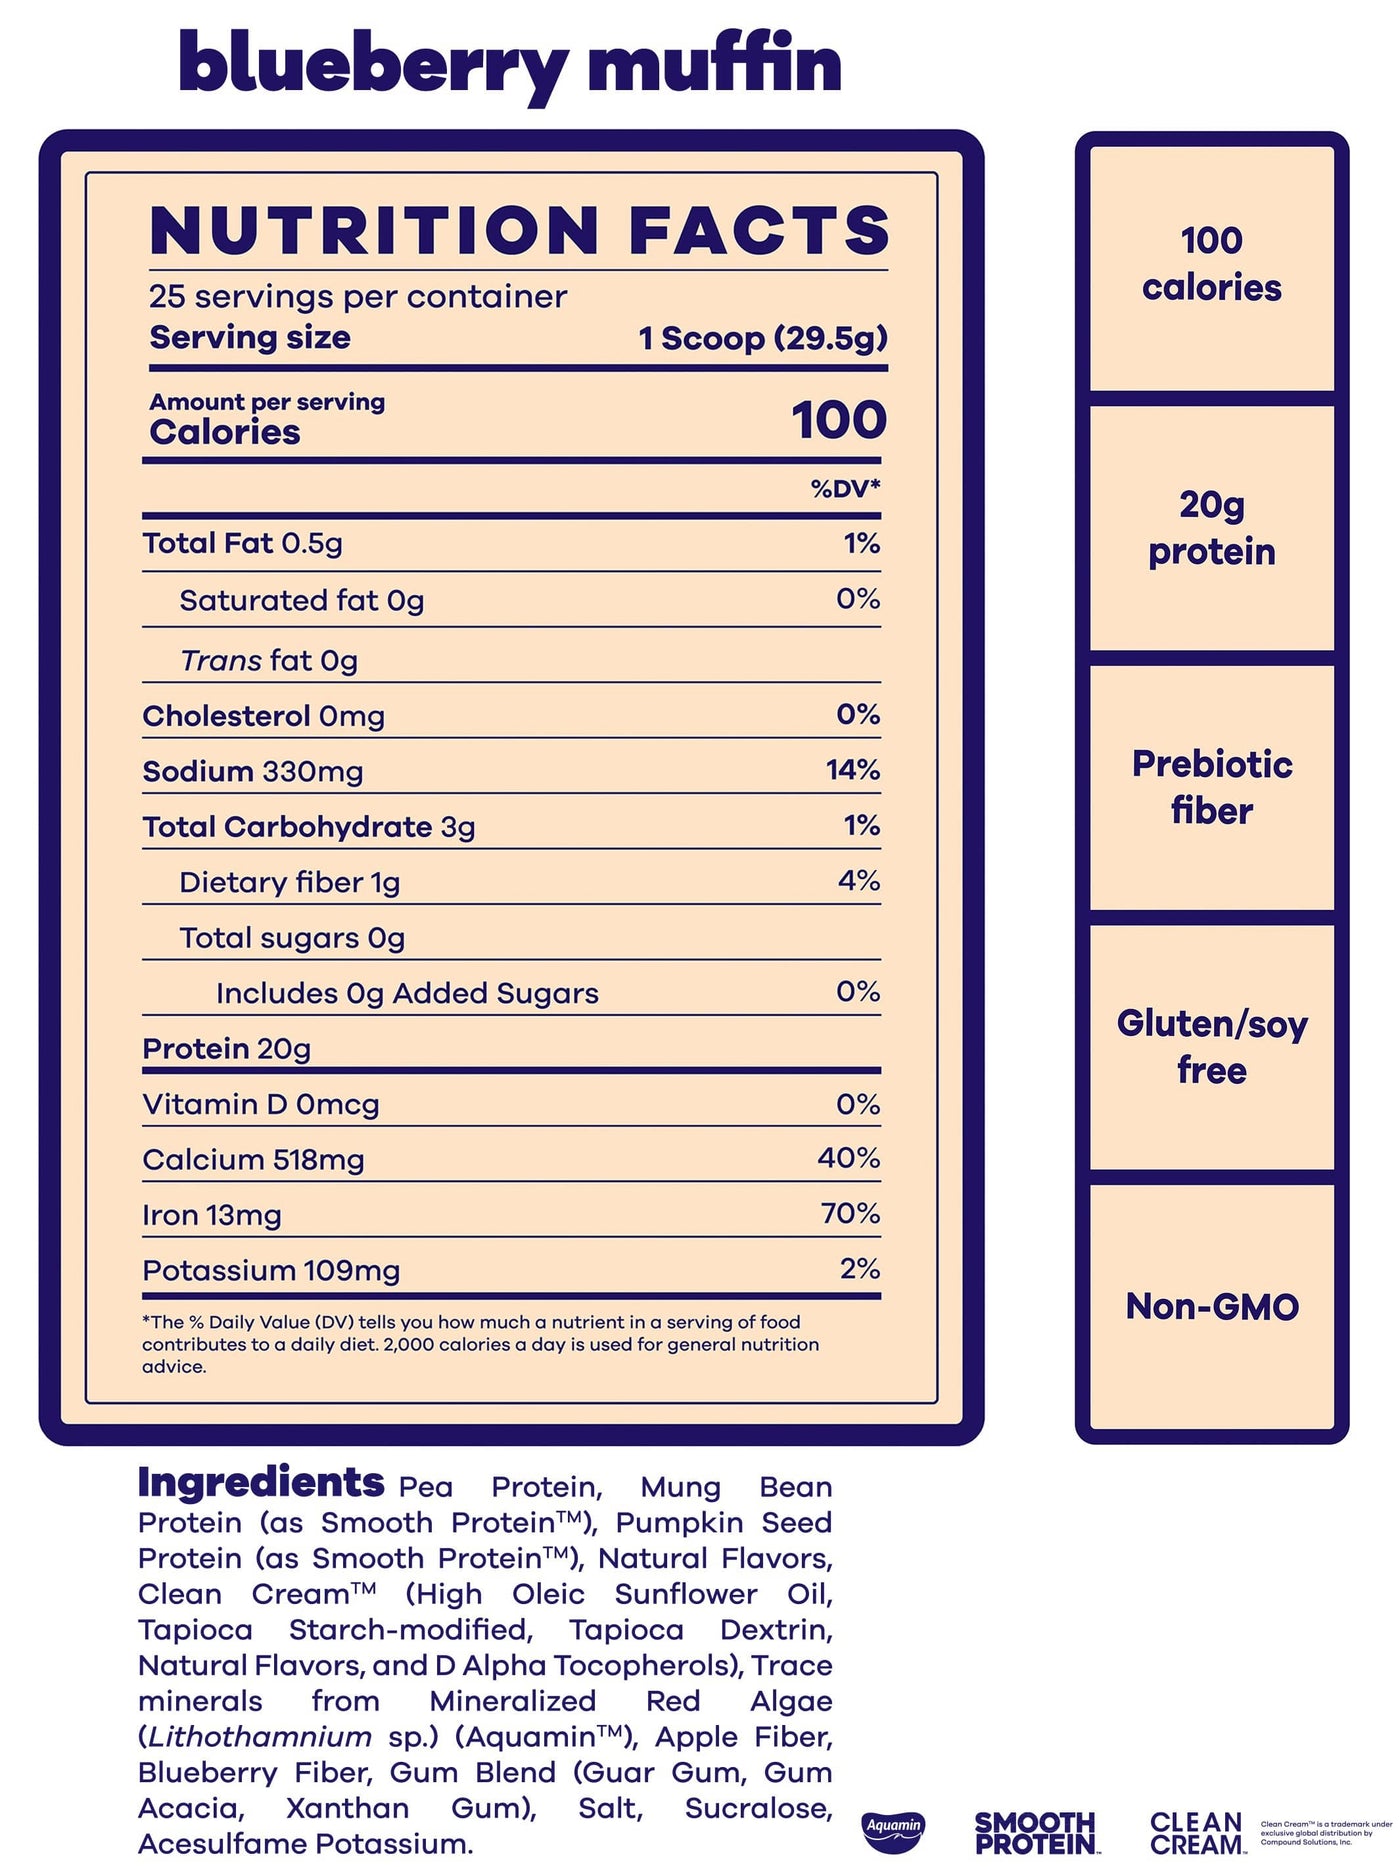 best tasting vegan protein blueberry muffin beam be amazing nutrition facts#25 Servings / Blueberry Muffin